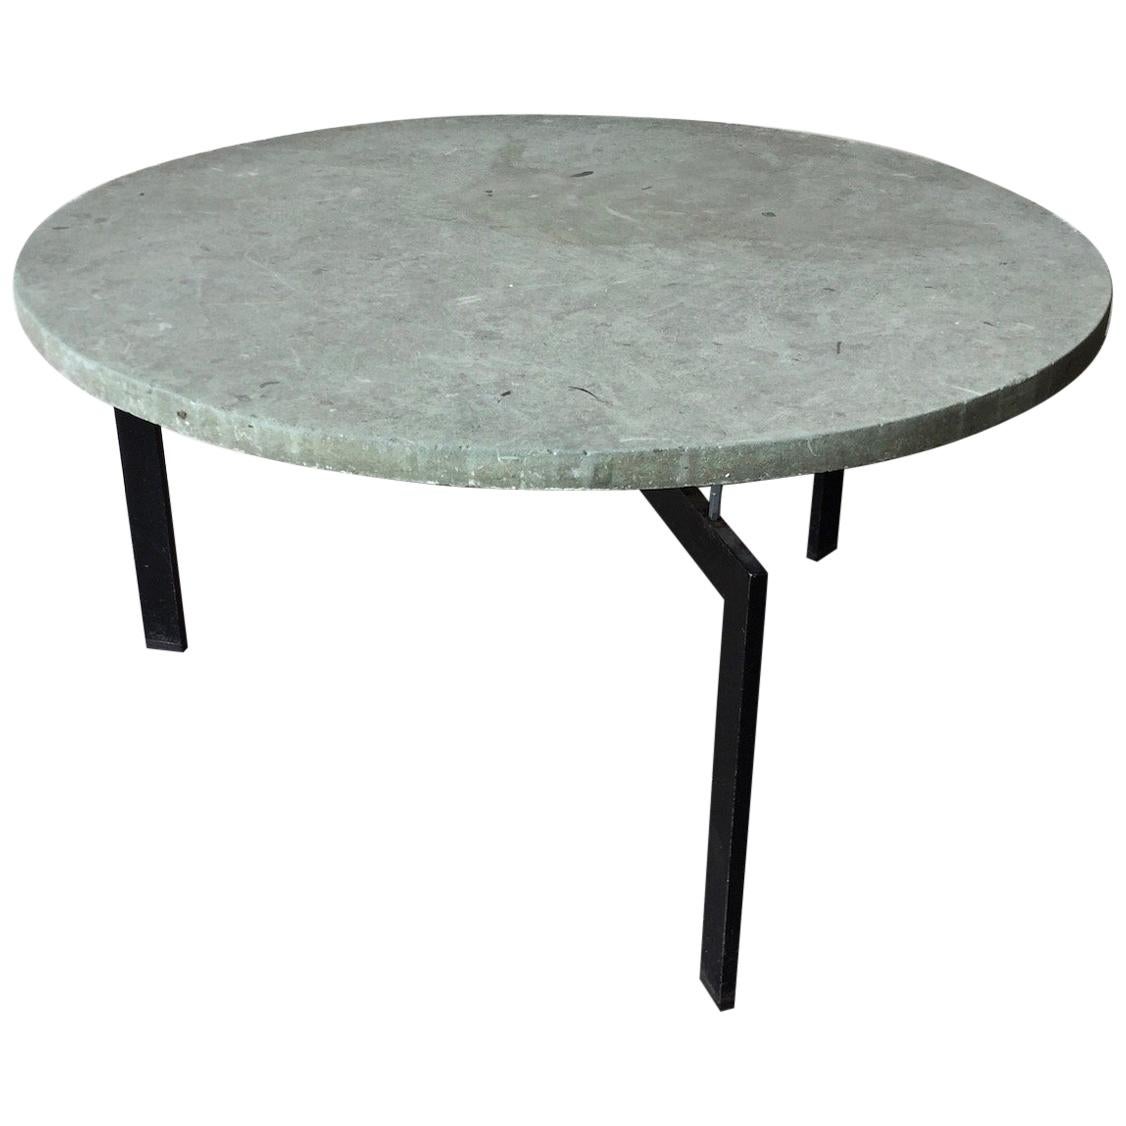 Unique Concrete Dining or Outdoor Table